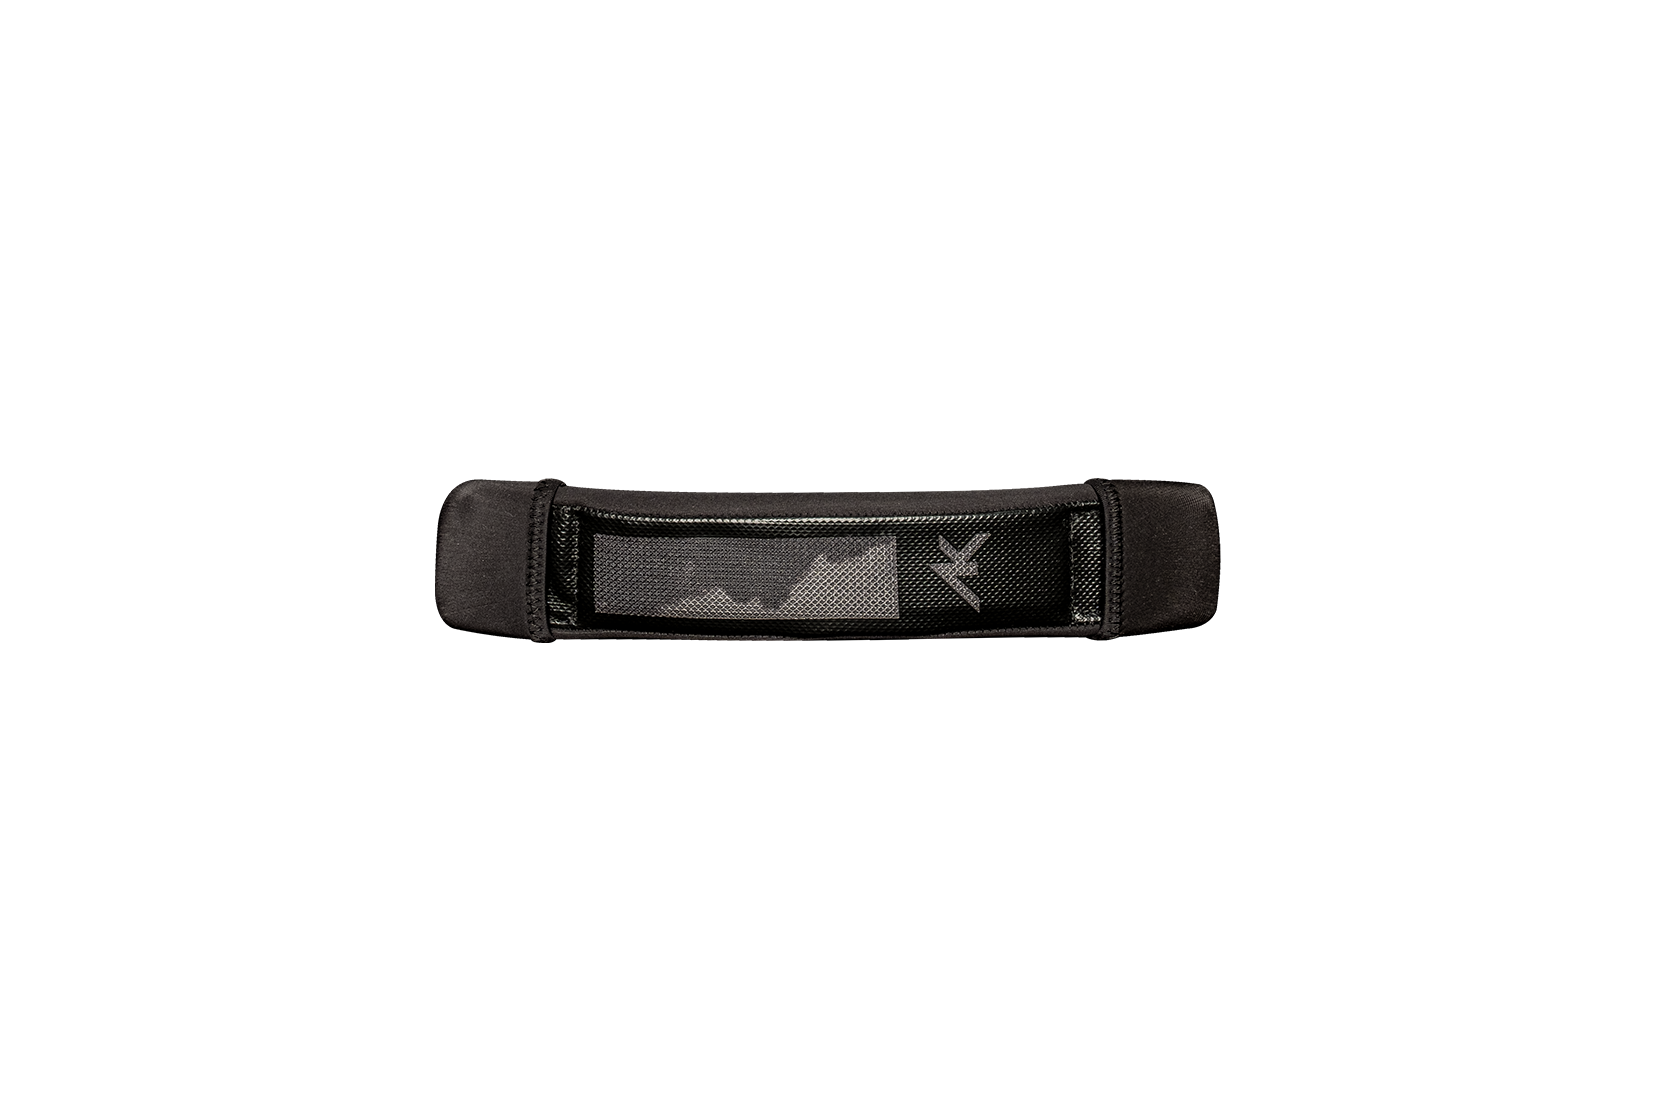 akdurablesupplyco-AK Ether Footstrap img 01Ether Footstraps